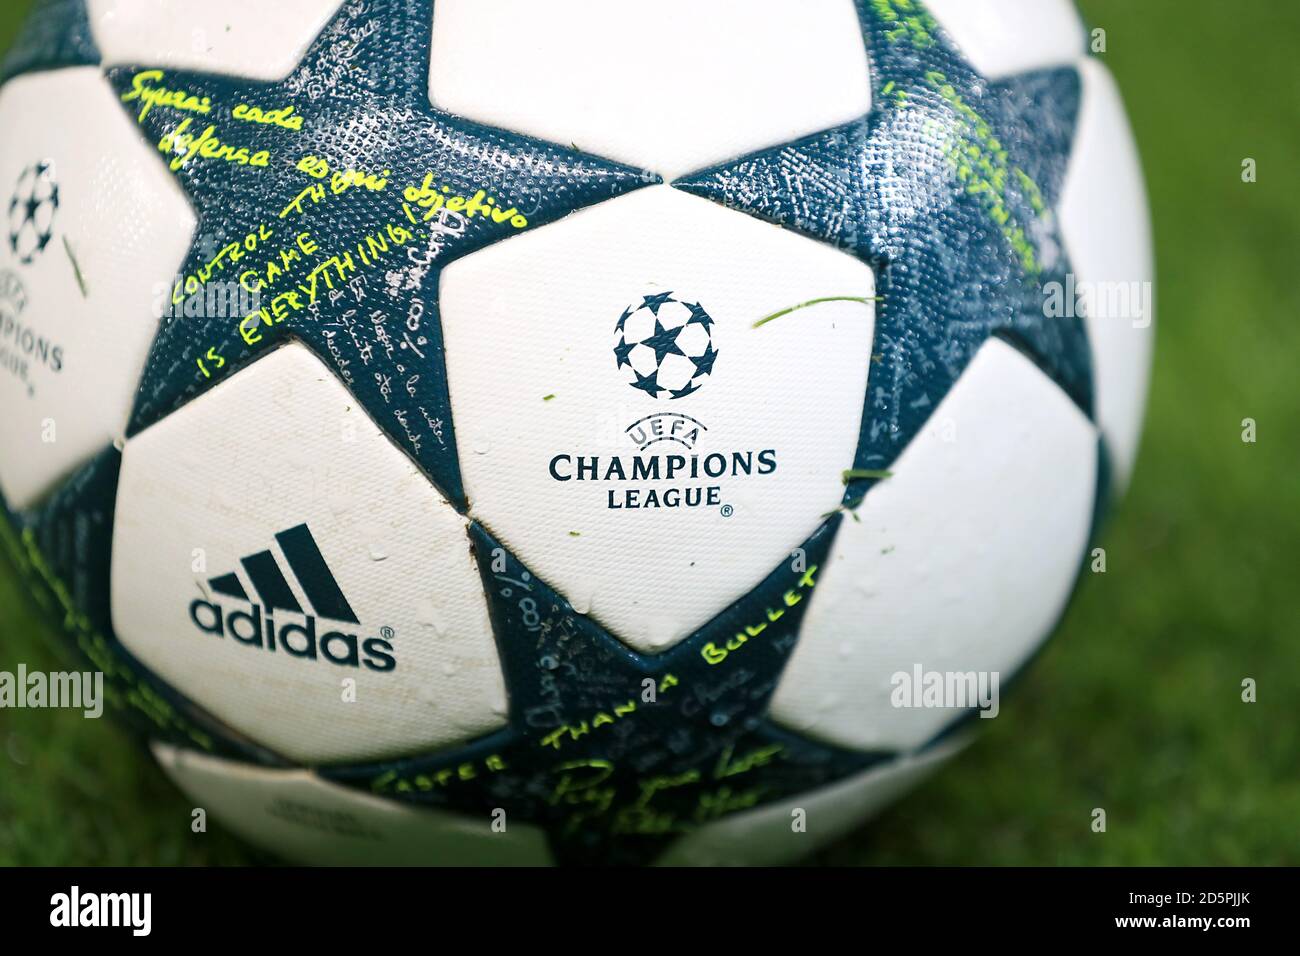 old champions league ball